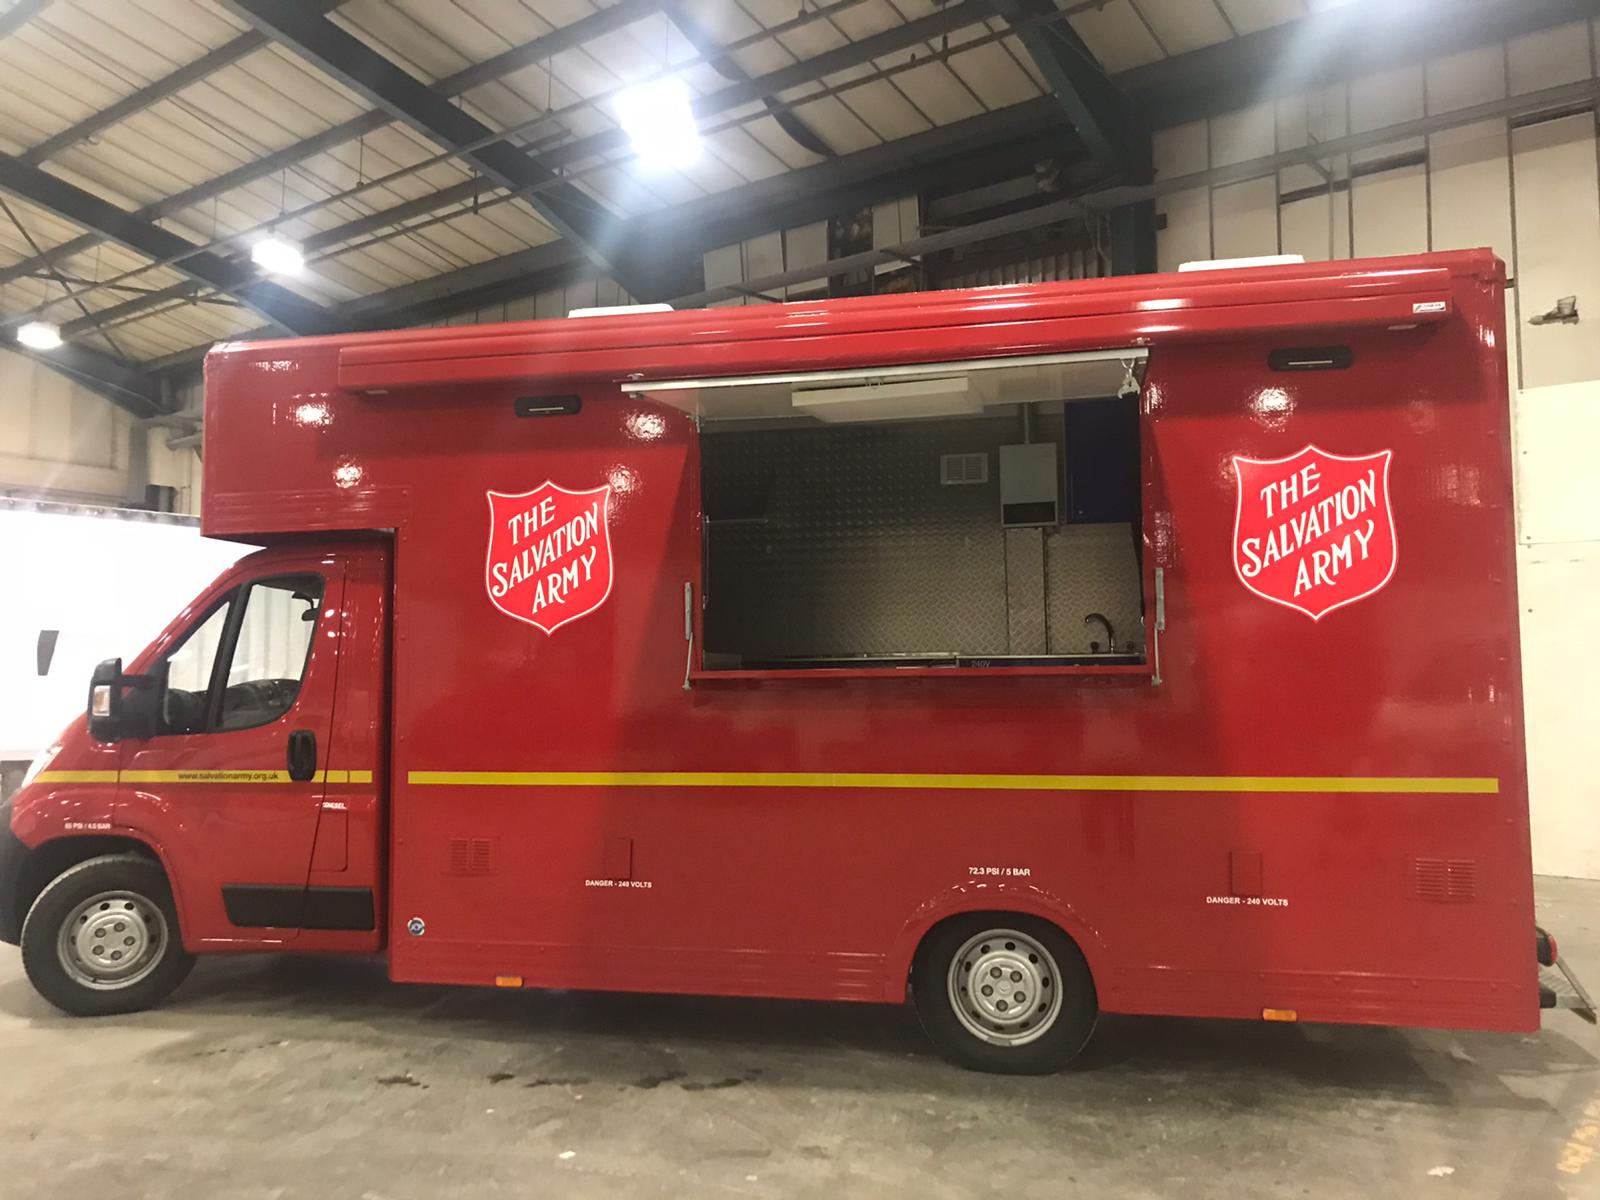 Design and Build! JC Payne helps manufacture bespoke bodies for Salvation Army